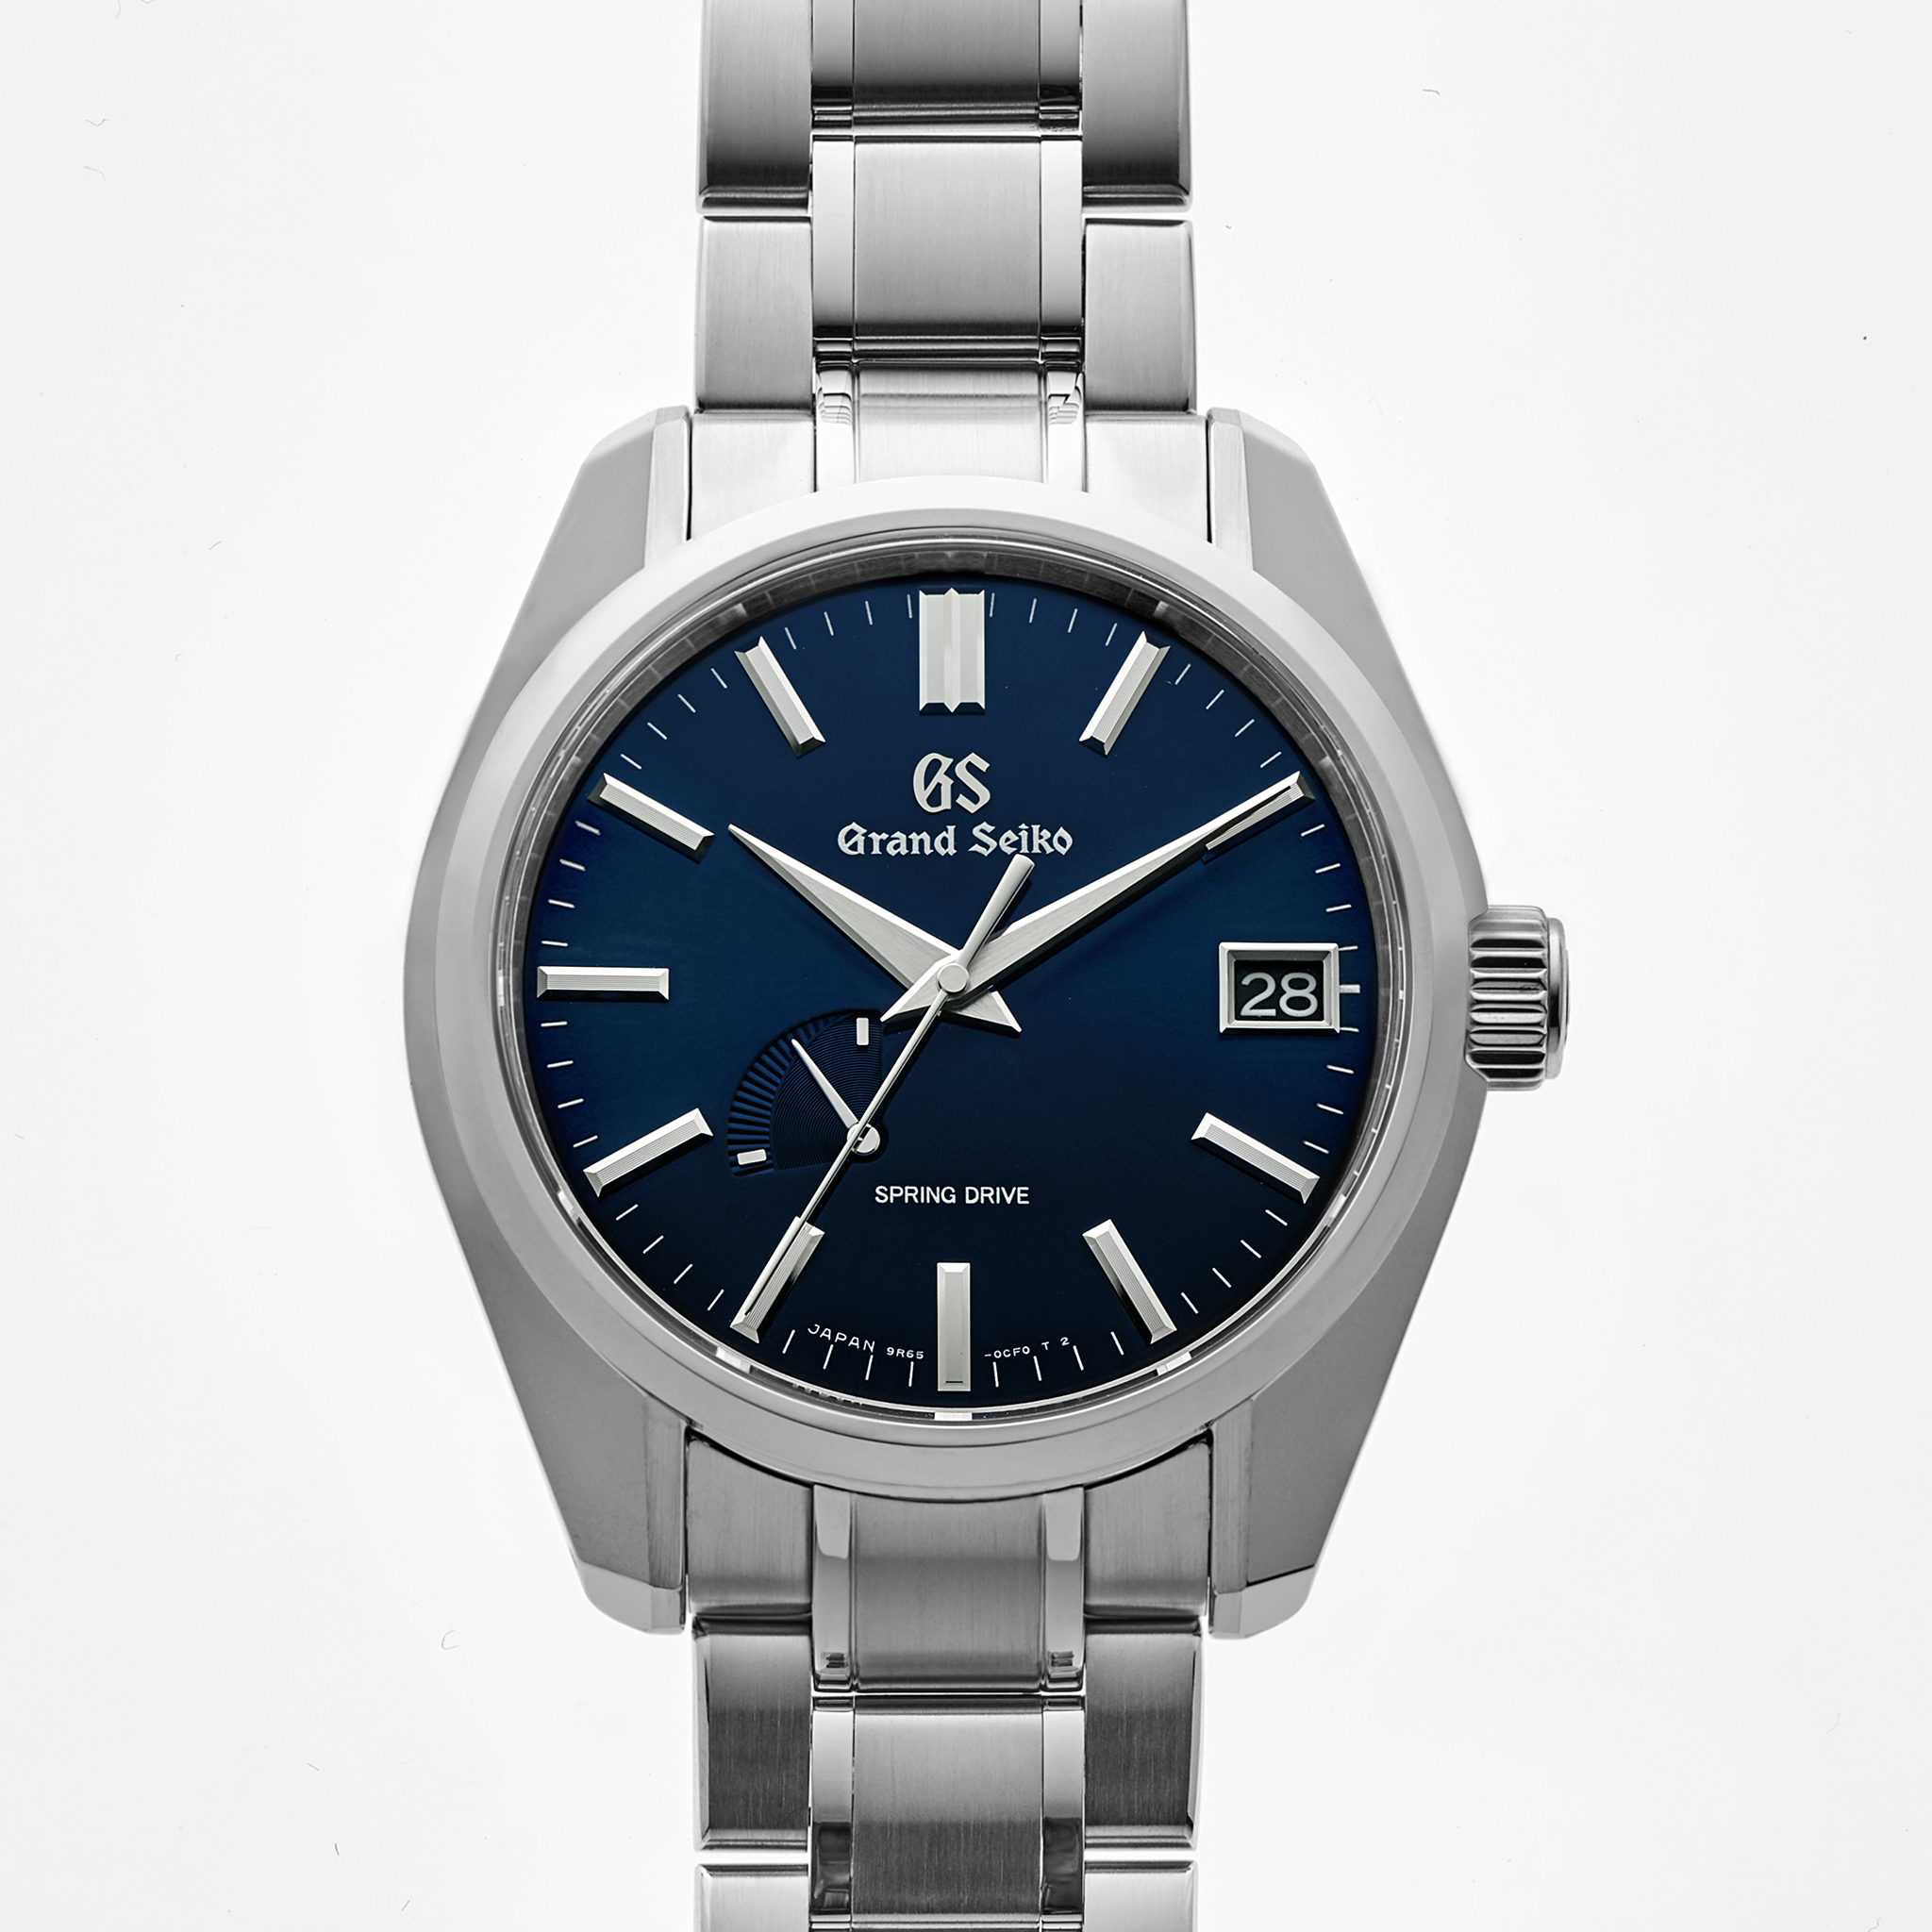 Grand Seiko Spring Drive Blue Dial on Sale, SAVE 57%.